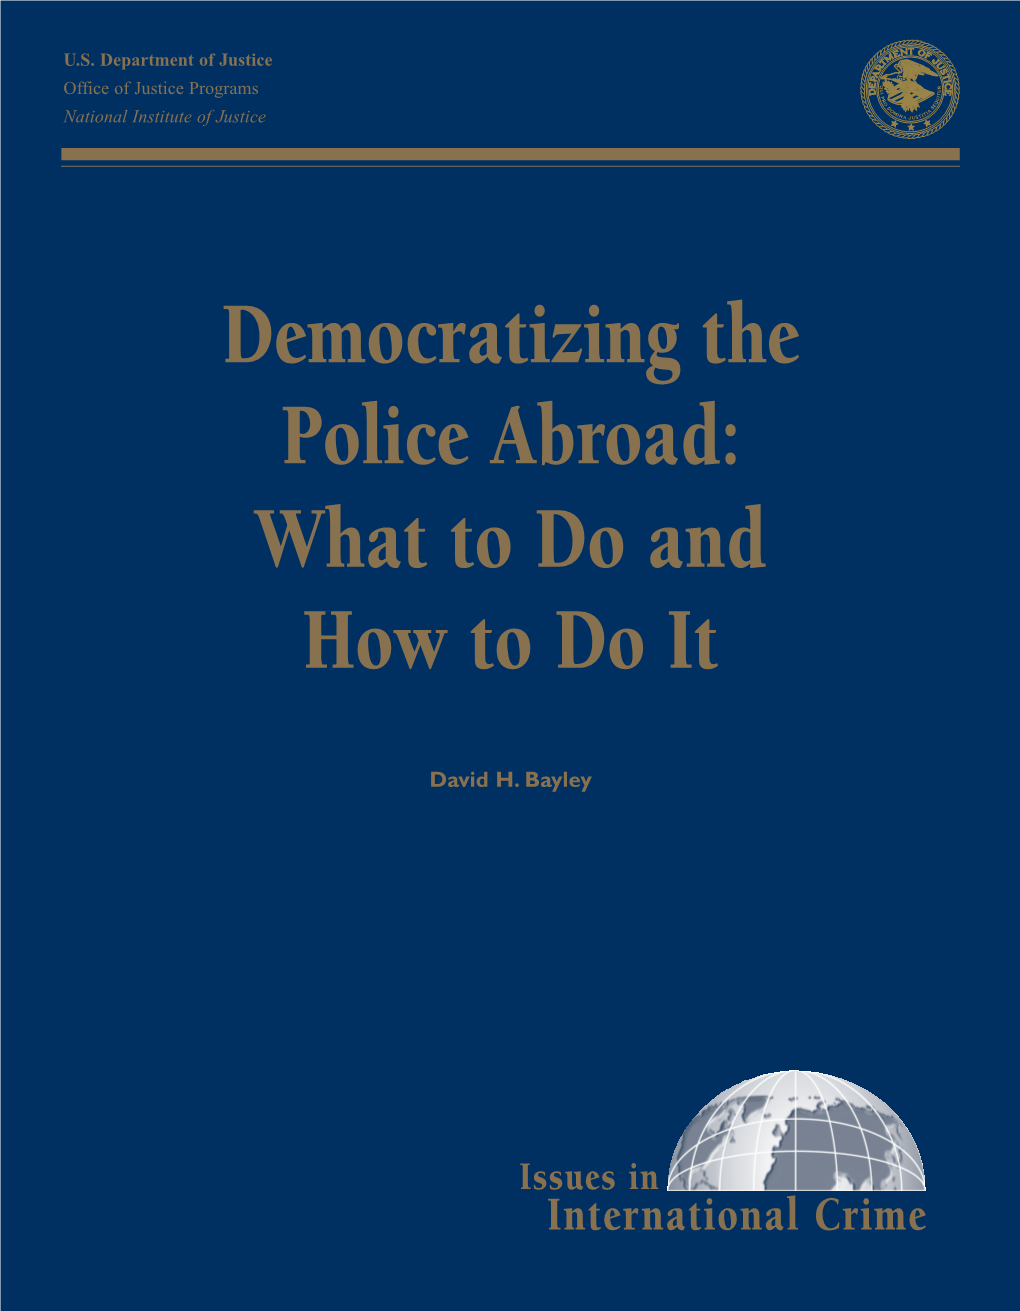 Democratizing the Police Abroad: What to Do and How to Do It